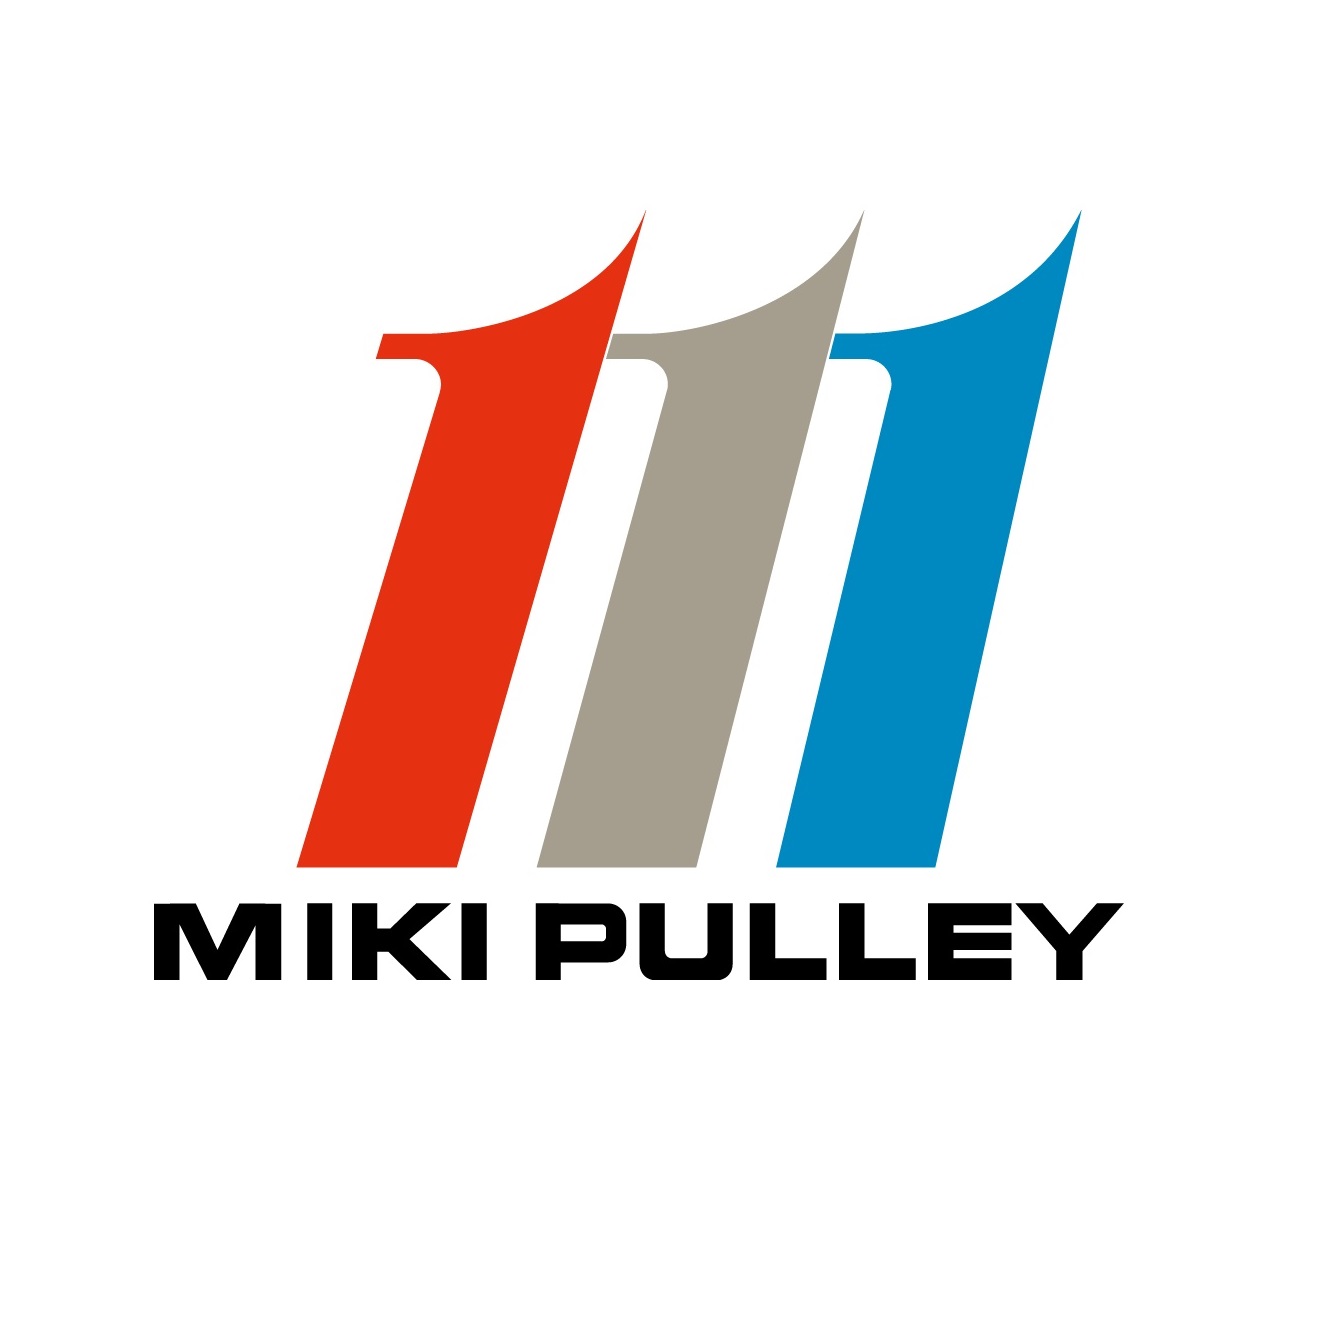 gioi-thieu-chung-ve-miki-pulley.png